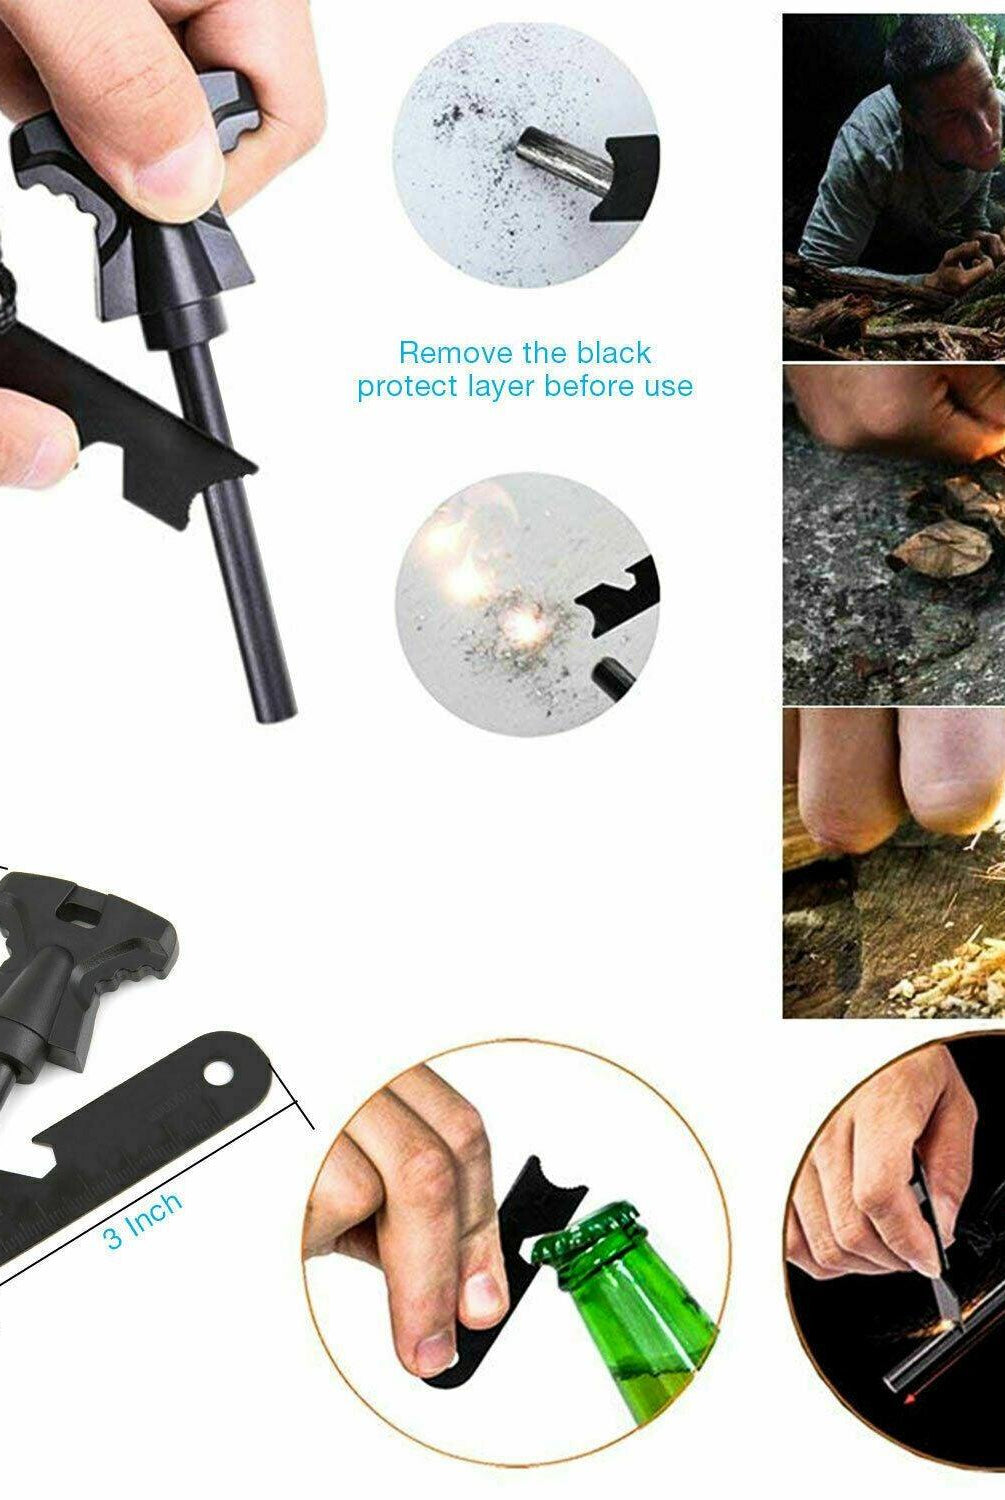 Gadgets Outdoor Emergency Survival And Safety Gear Kit Camping